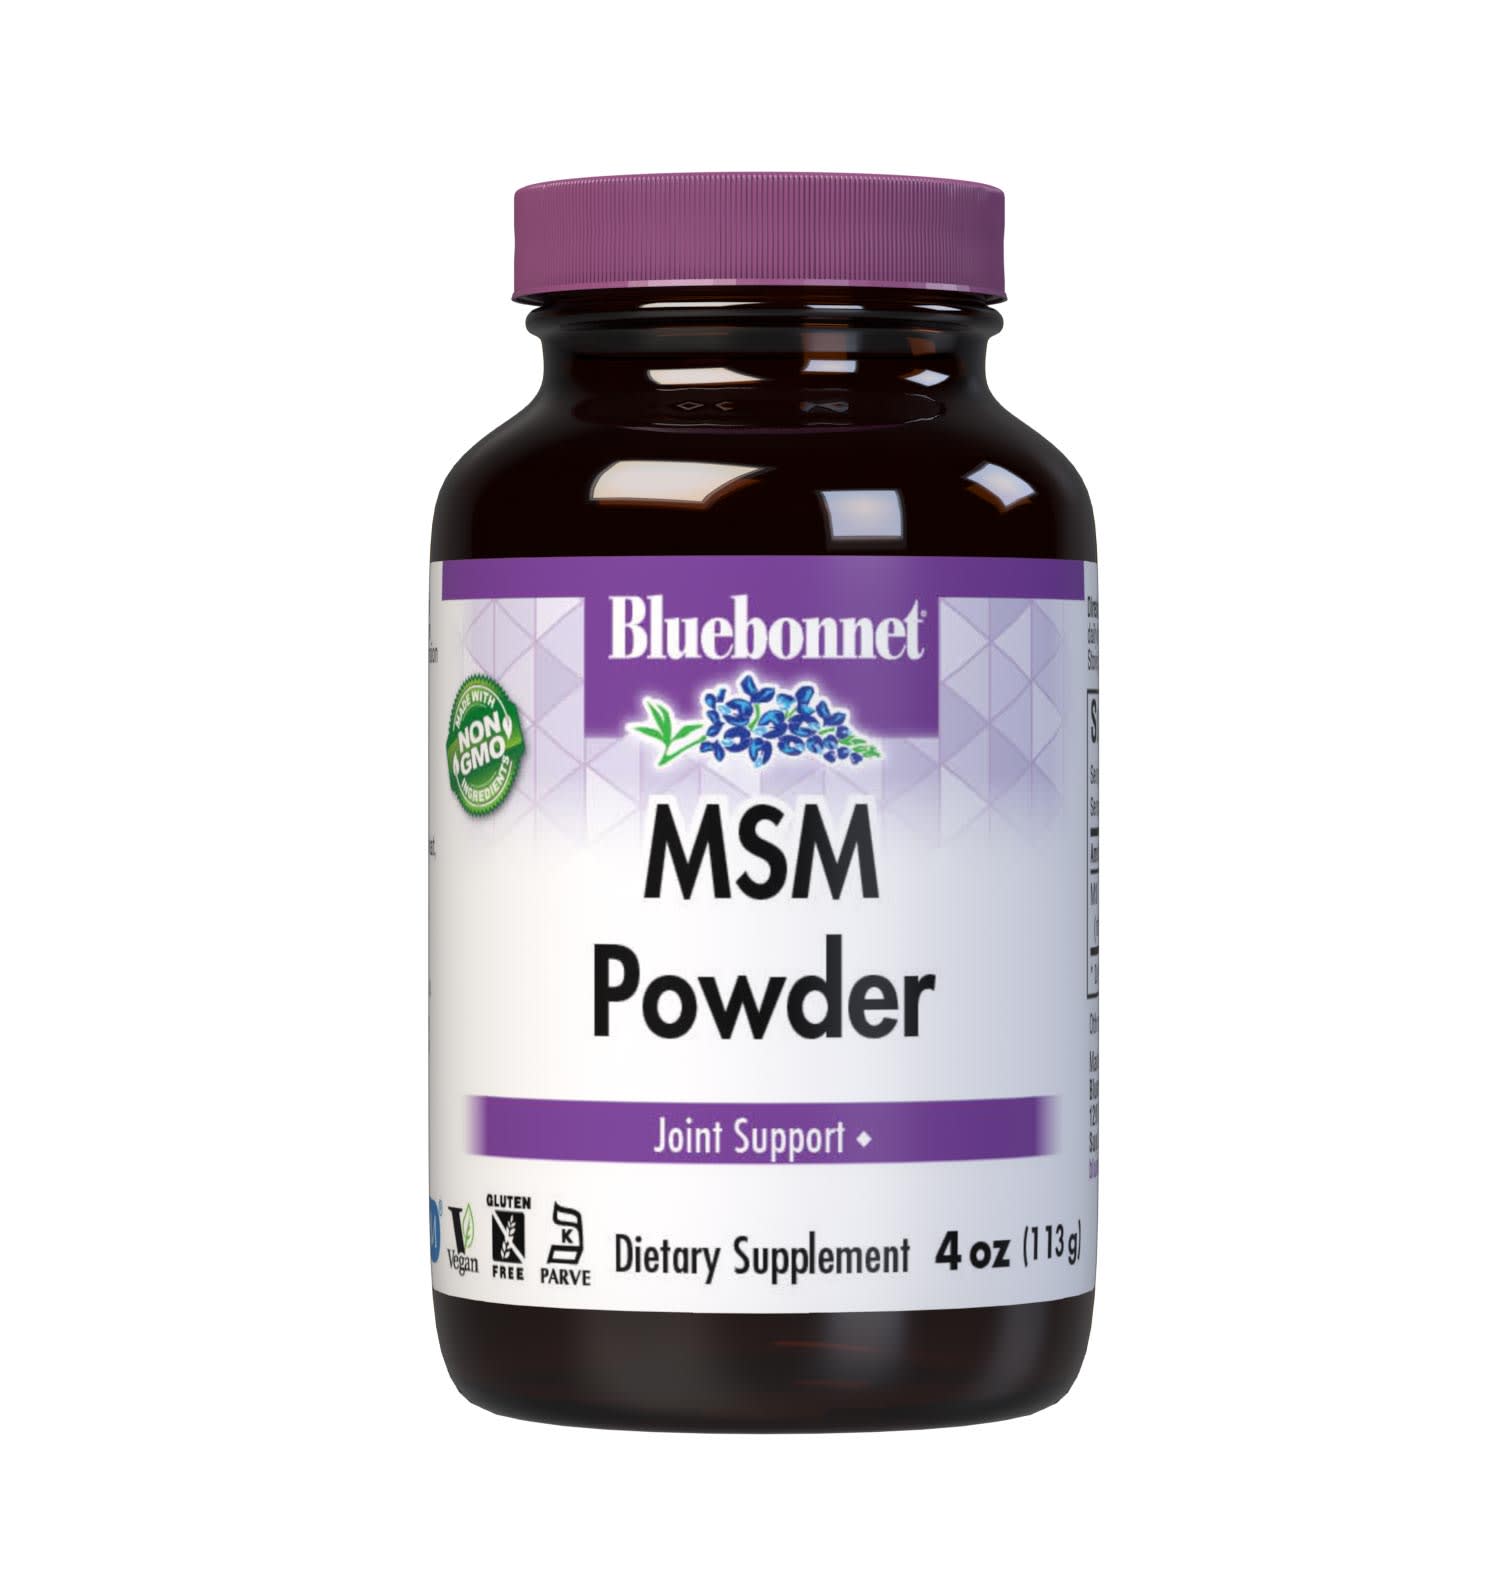 Bluebonnet’s MSM Powder is formulated with patented and clinically studied OptiMSM (methylsulfonylmethane), a non-toxic form of active sulfur that helps support the formation of healthy connective tissues for better joint health. #size_4 oz